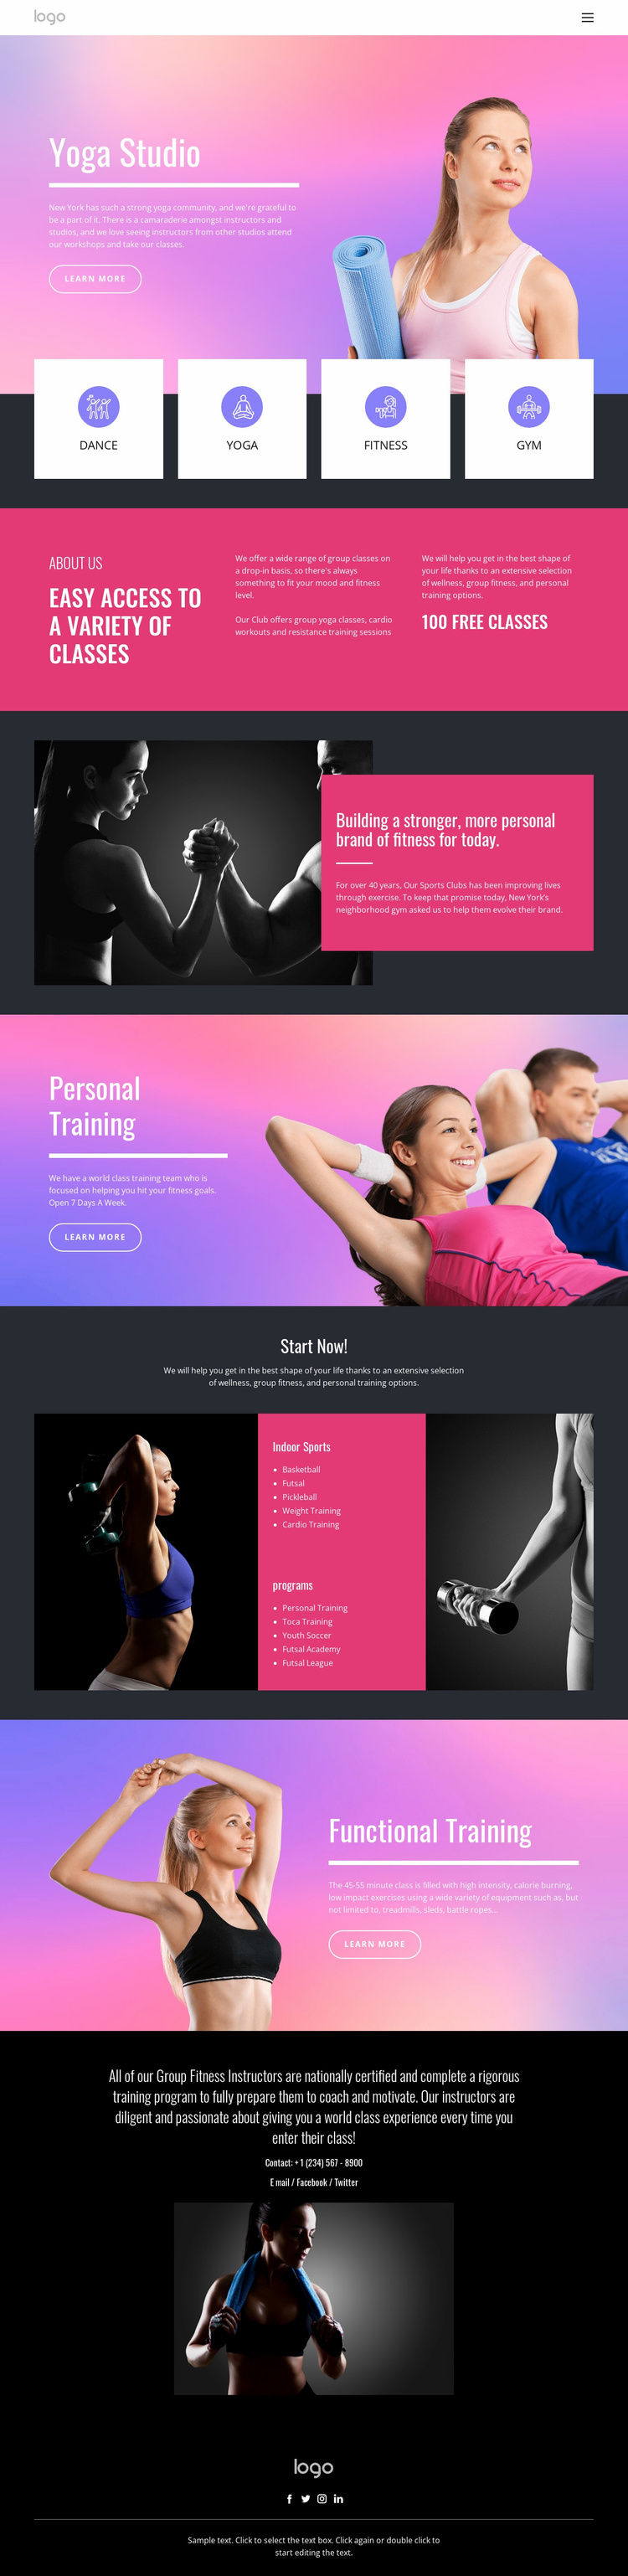 Wellness practice for self-inquiry Website Template